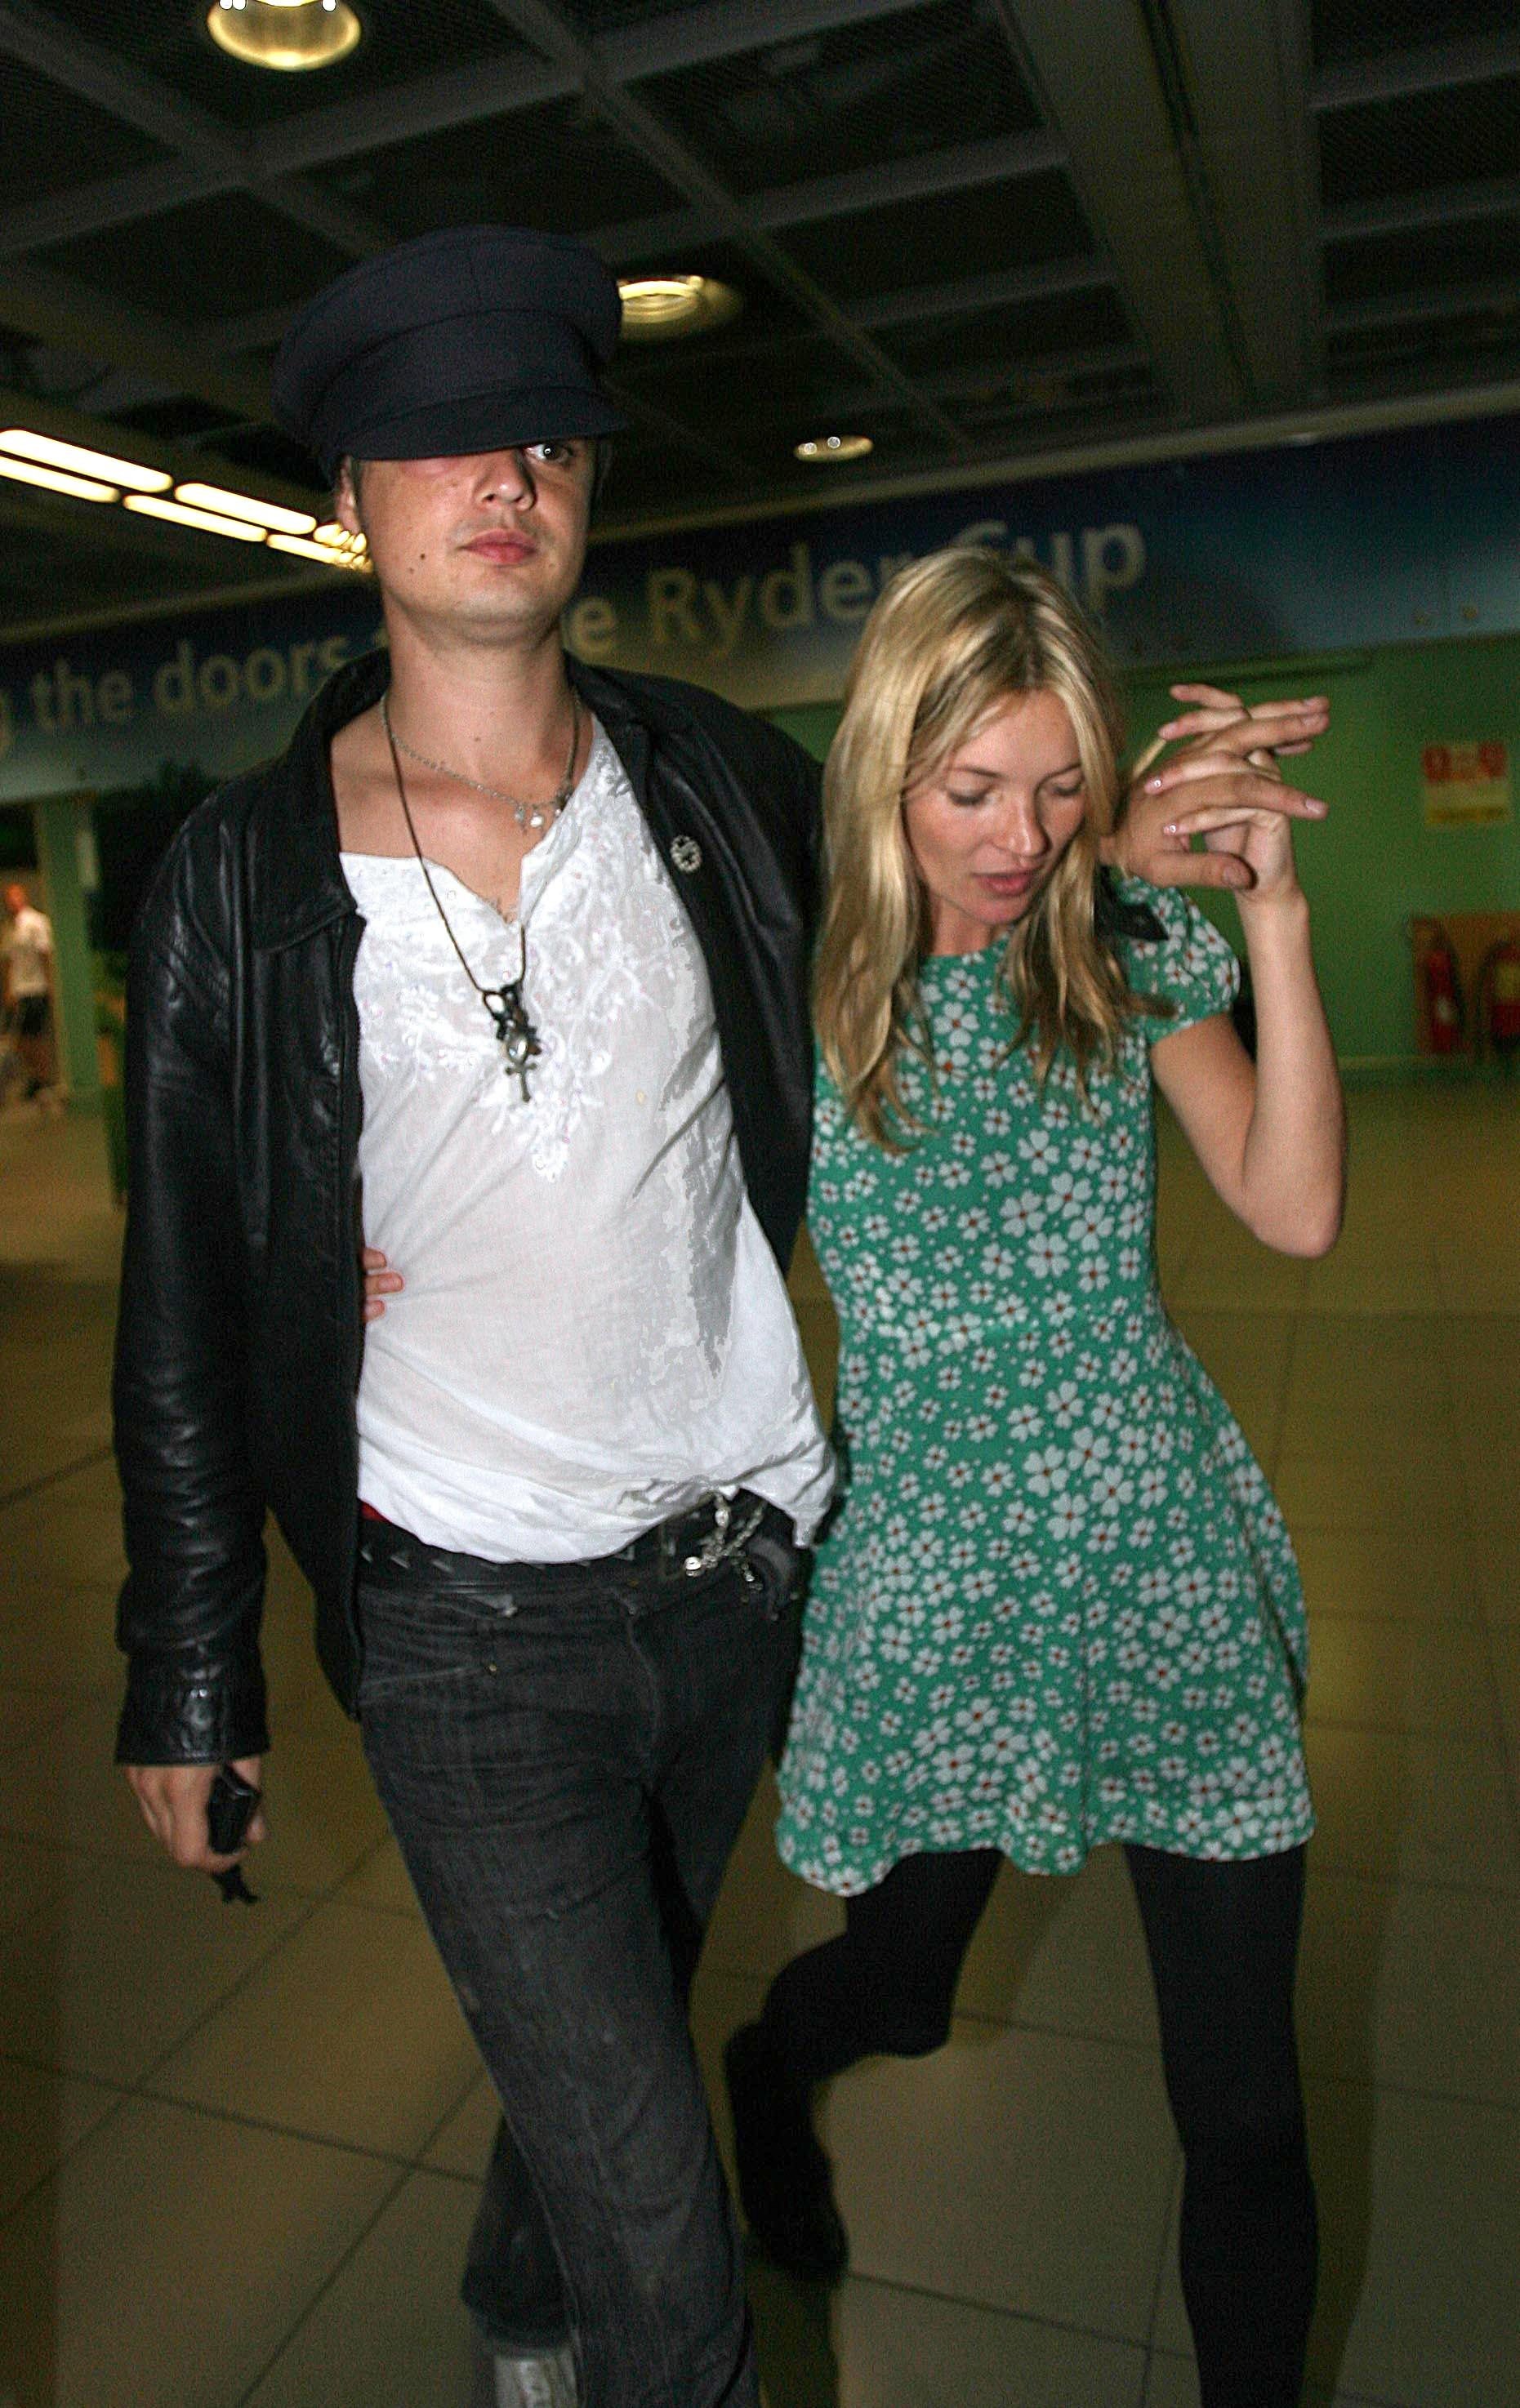 Babyshambles lead singer Pete Doherty and model Kate Moss arrive at Dublin Airport for a Babyshambles gig in Carlow